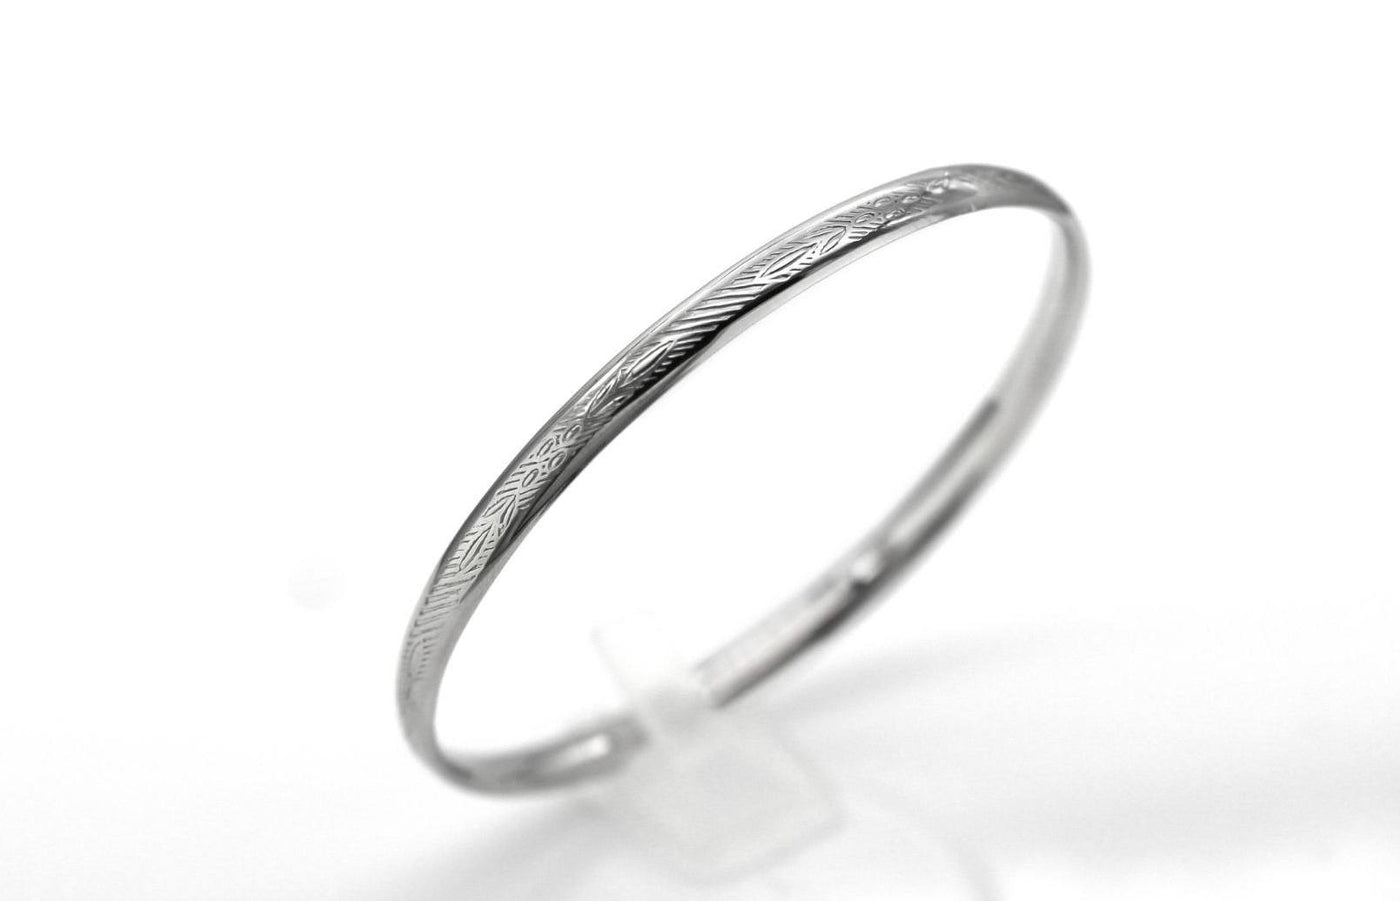 STERLING SILVER BANGLE RD WITH FERN ENGRAVING 65mm